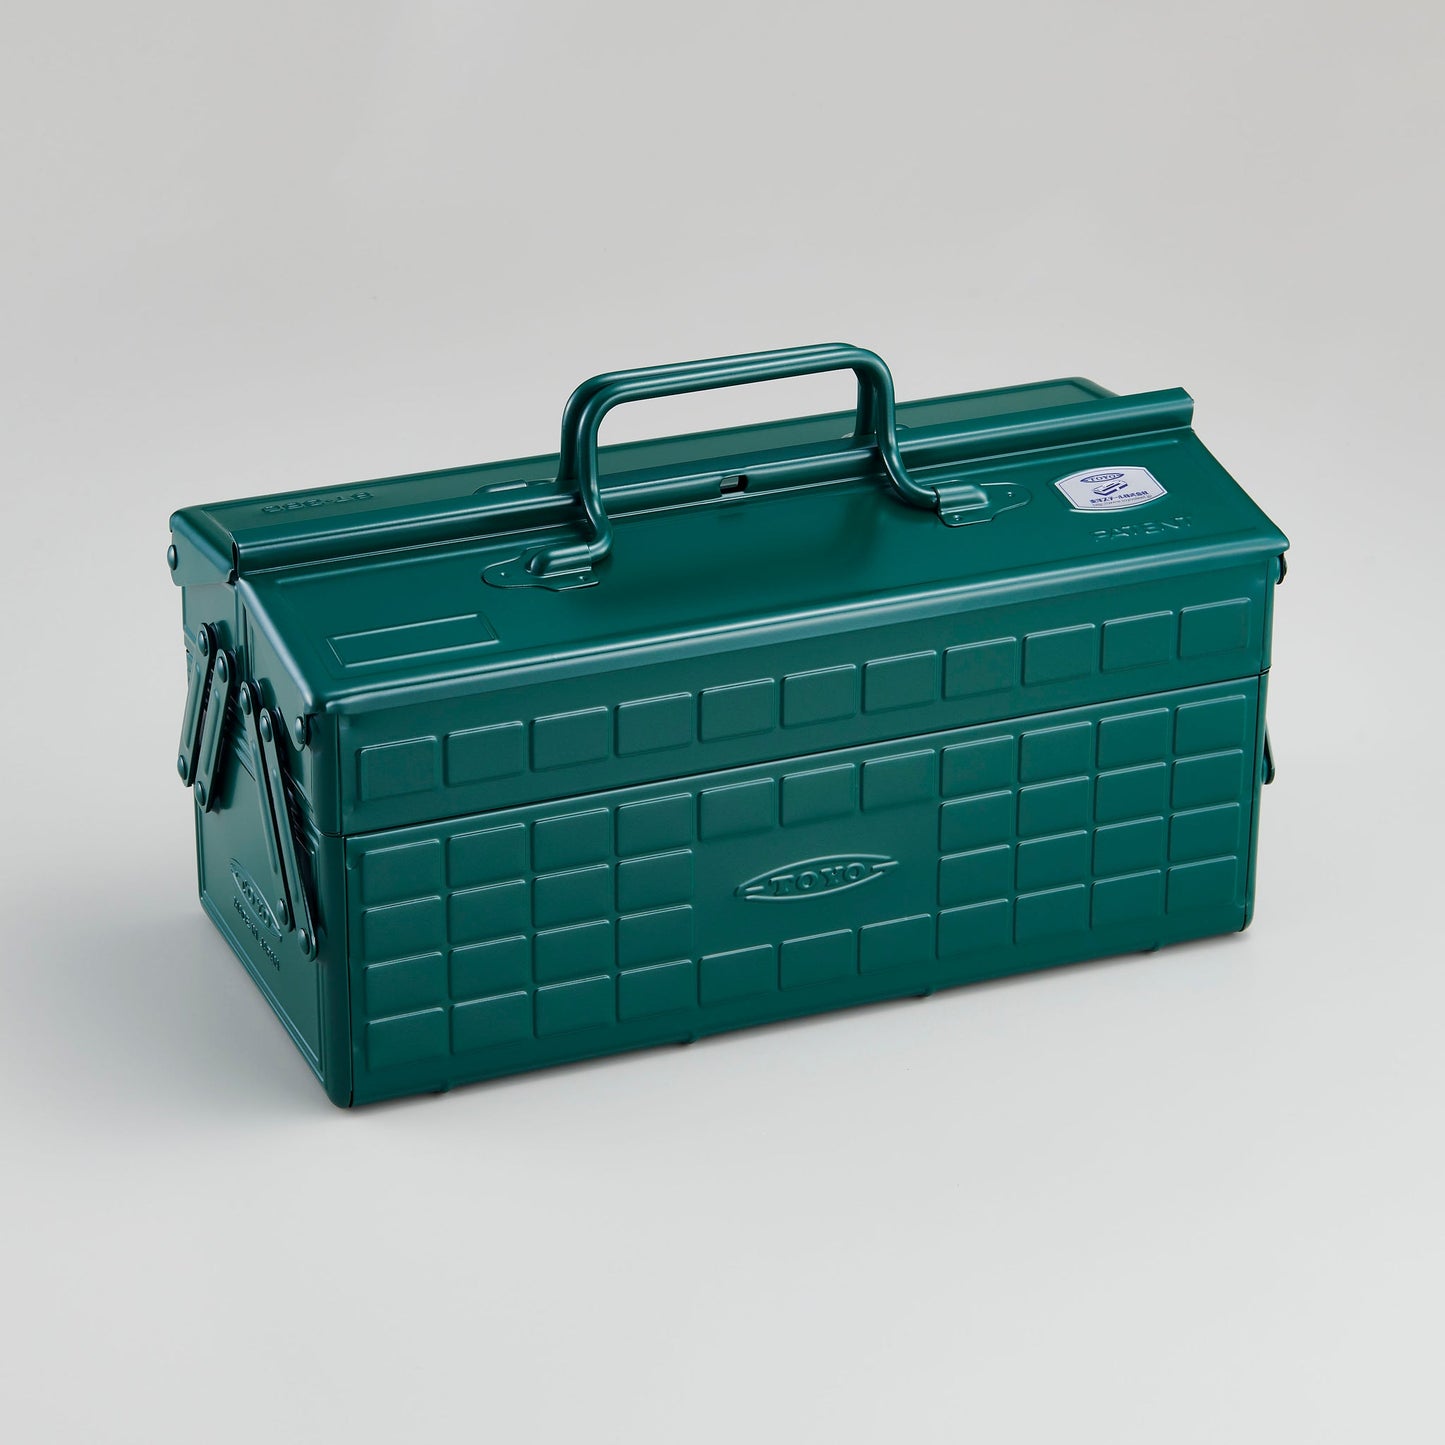 Steel Toolbox w/ Cantilever Lid - Antique Green